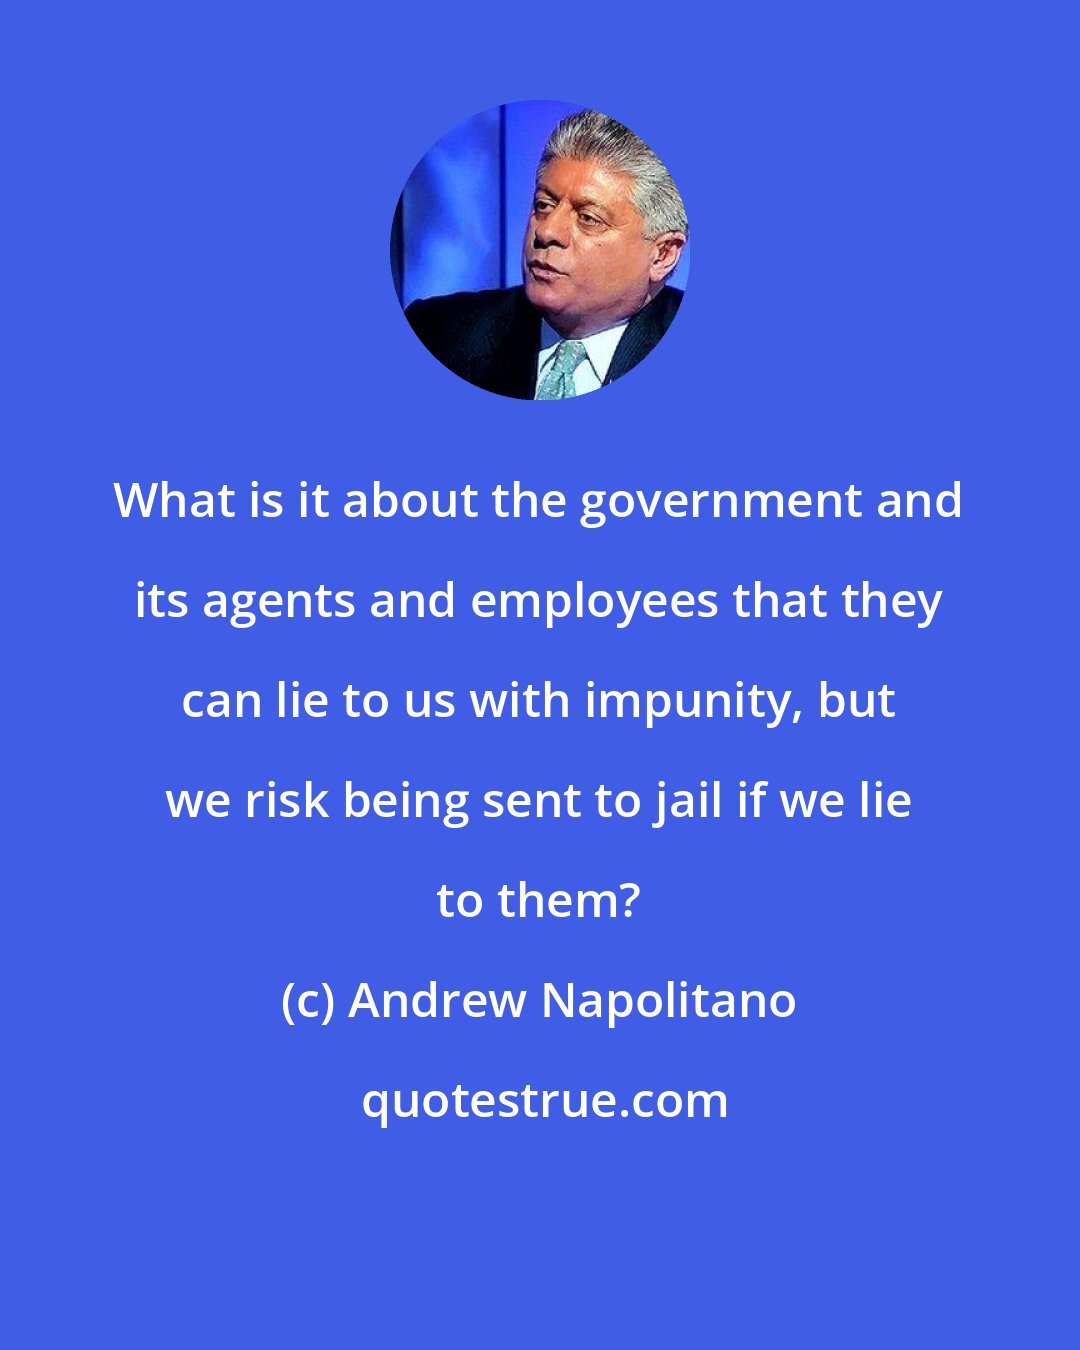 Andrew Napolitano: What is it about the government and its agents and employees that they can lie to us with impunity, but we risk being sent to jail if we lie to them?